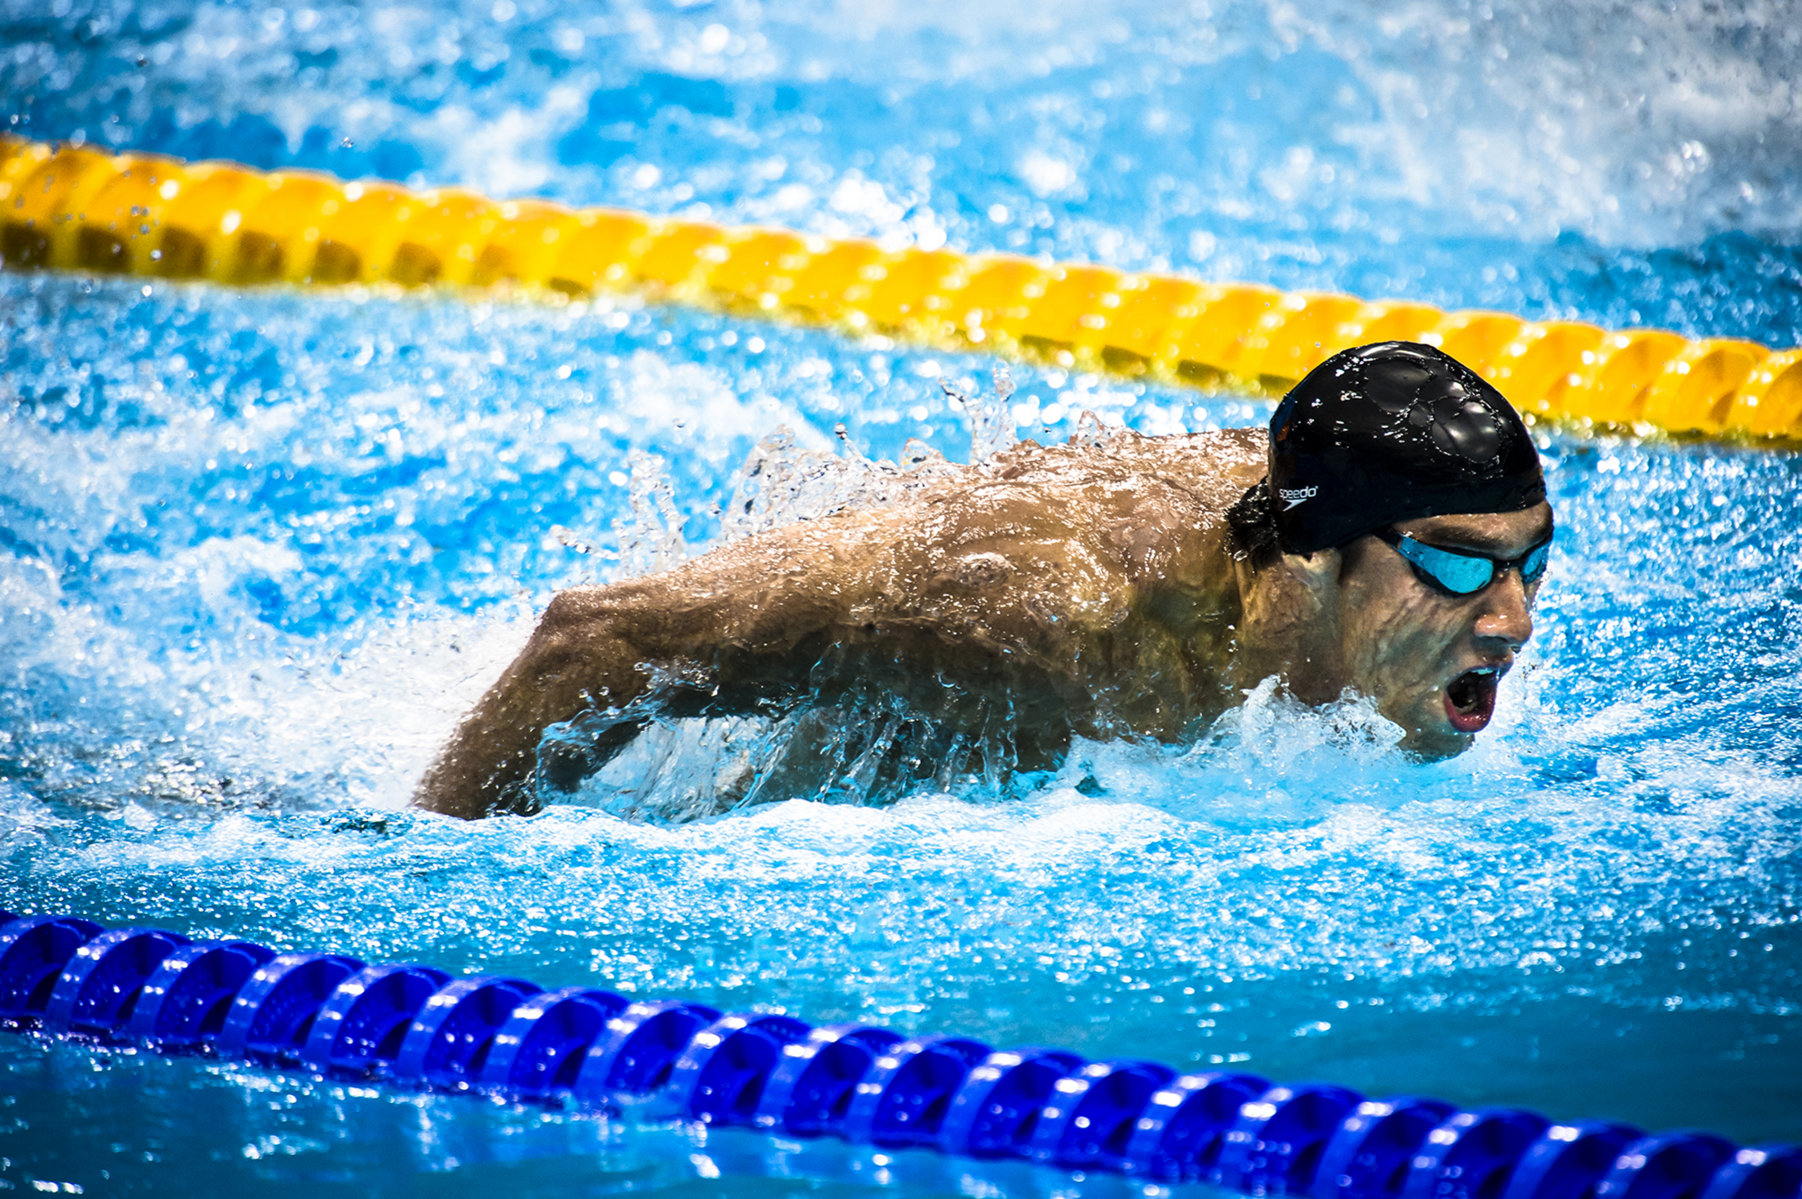 <h4 style="text-transform:uppercase">Michael Phelps competing in the London Olympics</h4>
<div class="captiontext">
The most decorated Olympic athlete of all-time, with 23 gold medals, Michael Phelps is seen here competing in the Men's 200 meter Butterfly during the London Olympics in 2012.  Phelps' large torso and small legs are the ideal proportions for a swimmer, and when he emerges from beneath the water in the explosive bursts characteristic of the butterfly, it appears almost as if a nuclear submarine is surfacing.  Powerful, focused and determined, Phelps' abilities in the pool have already assured him of a certain athletic immortality.  In recent years he has turned his attention to the human deficit such single minded pursuit often leaves, often speaking about depression amongst athletes, the need for whole human development and interconnection.  He has famously said that when he looked in the mirror, he saw a swimmer and not a person.  The realization and his own bouts with depression lead him on a journey of self discovery and wholeness and to advocacy work related to mental health.  
</div> : Limited Editions : Photography by Adam Stoltman: Sports Photography, The Arts, Portraiture, Travel, Photojournalism and Fine Art in New York